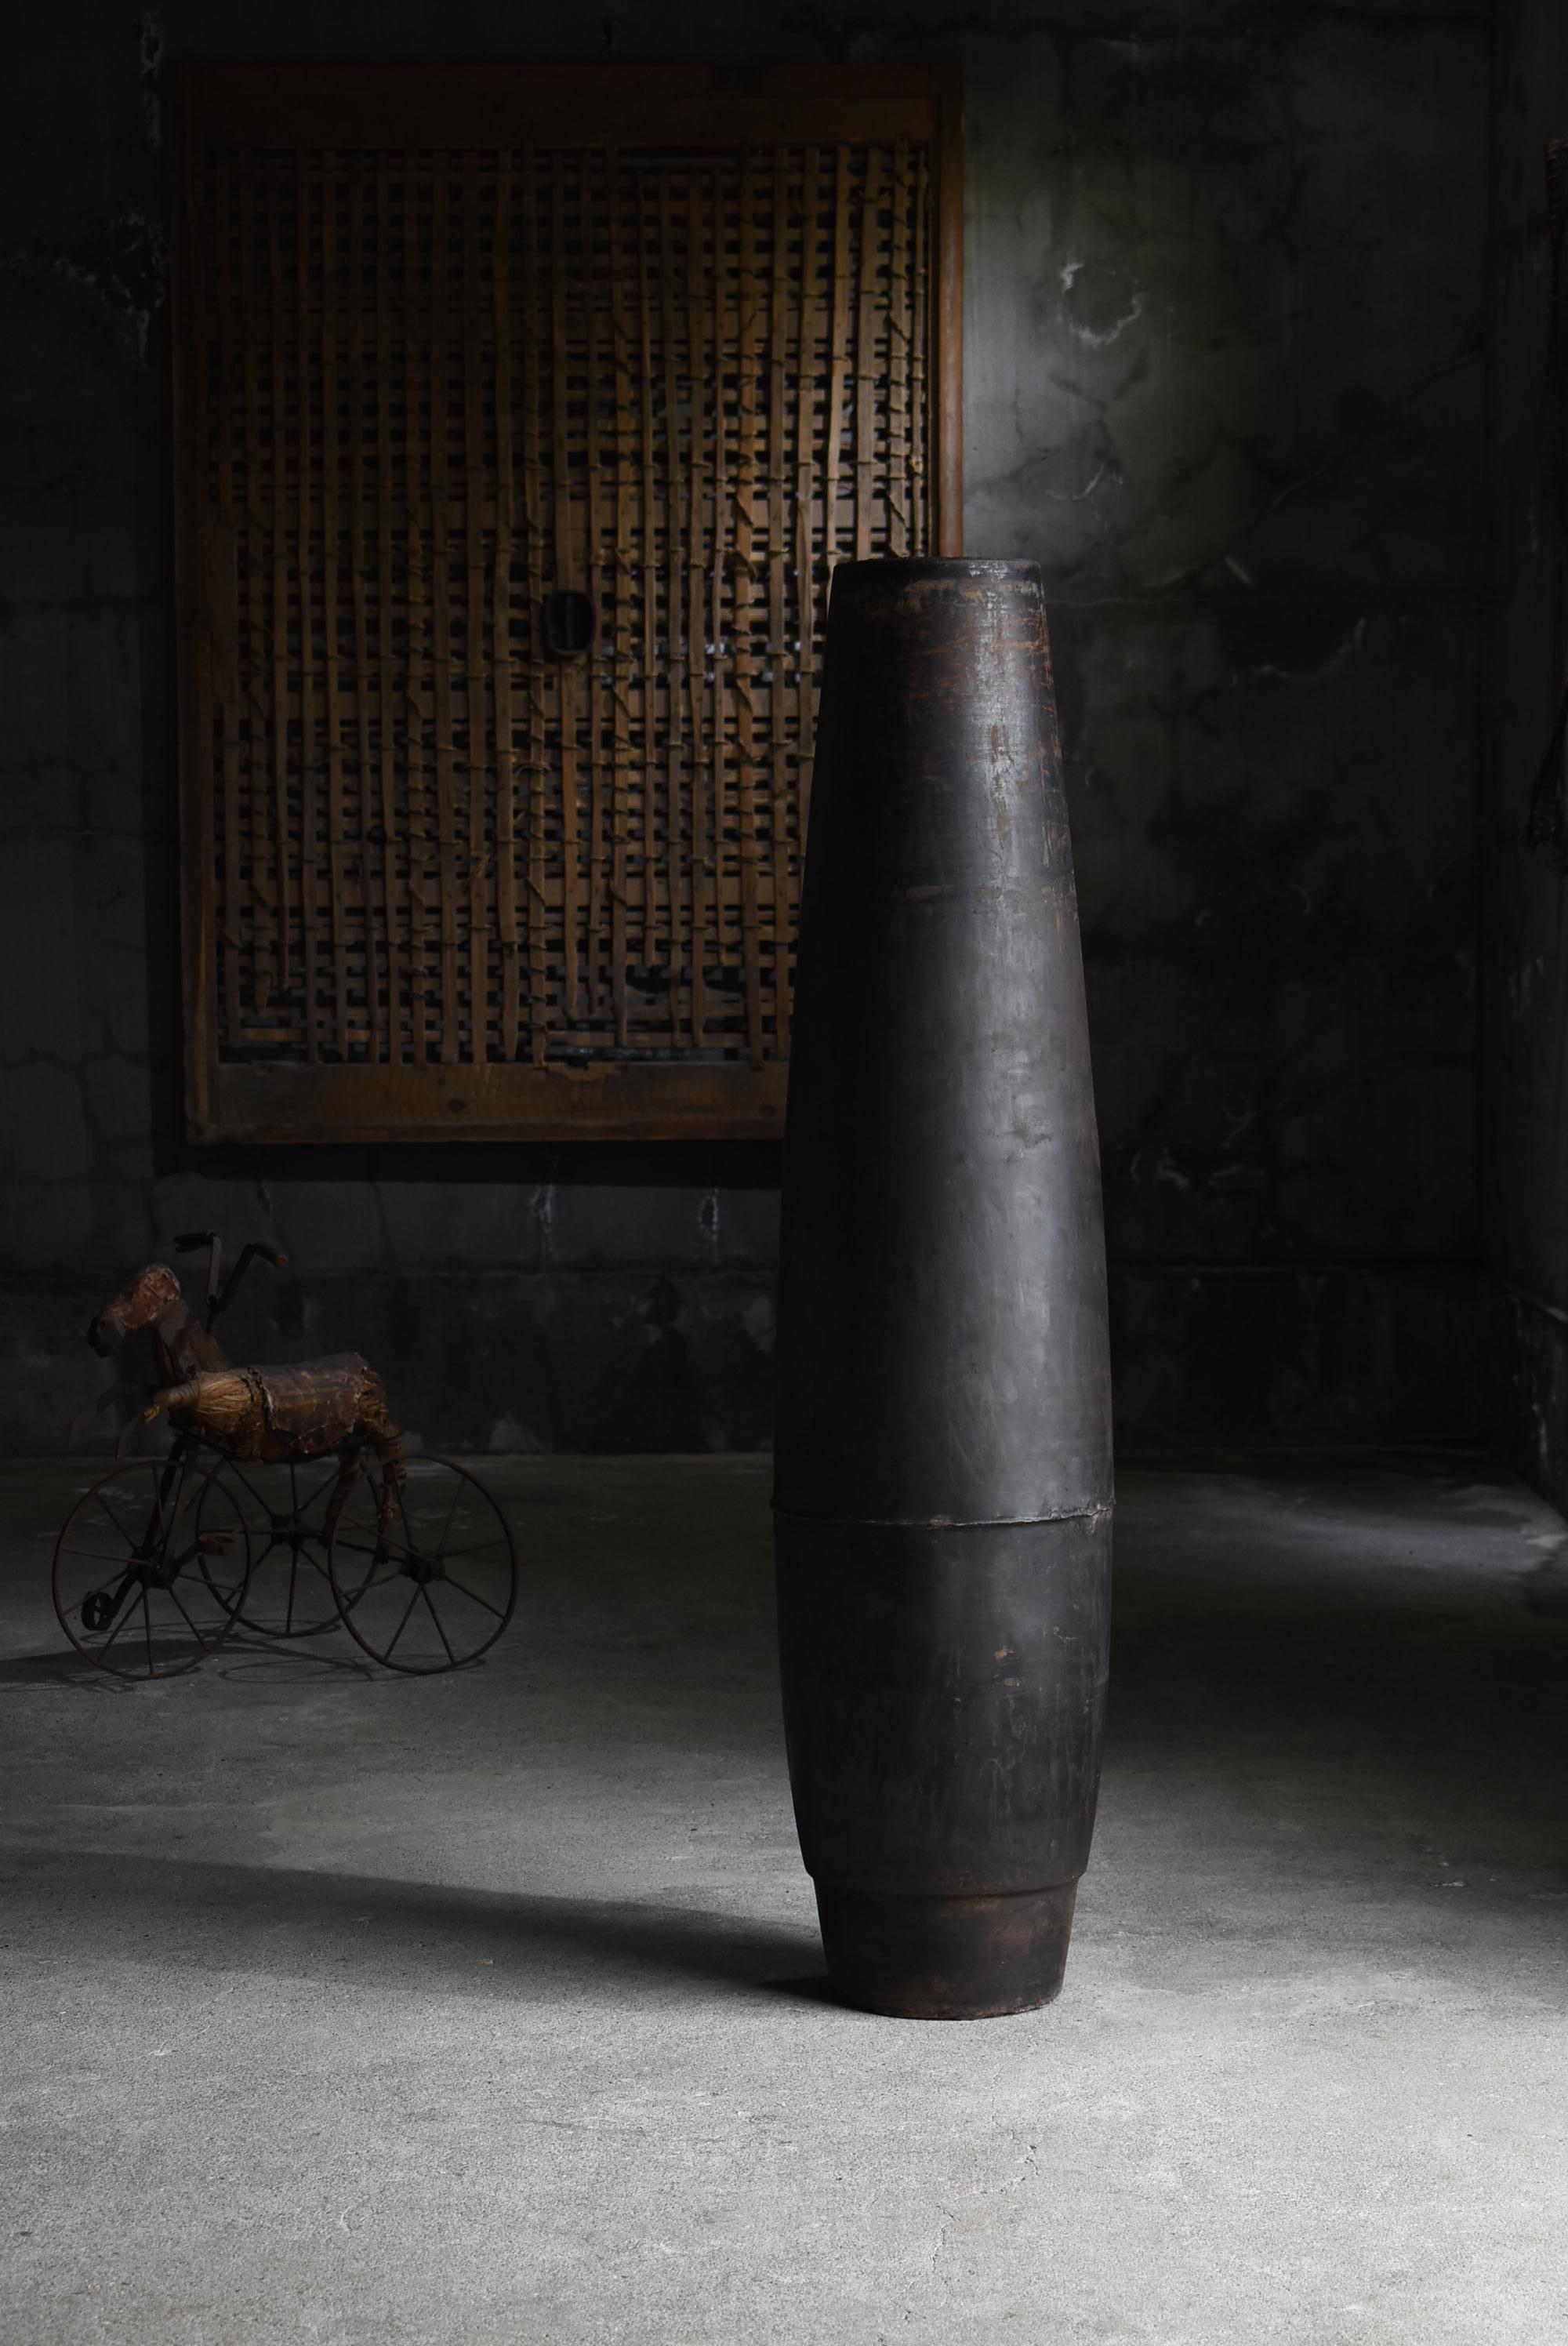 Very old iron cylinder.
Presumed to be a shell dropped on Japan during the war.
The period is believed to be from the 1900s to the 1940s.

Some time after it was dropped, this cylinder was discovered.

This shell, which has now become a beautiful